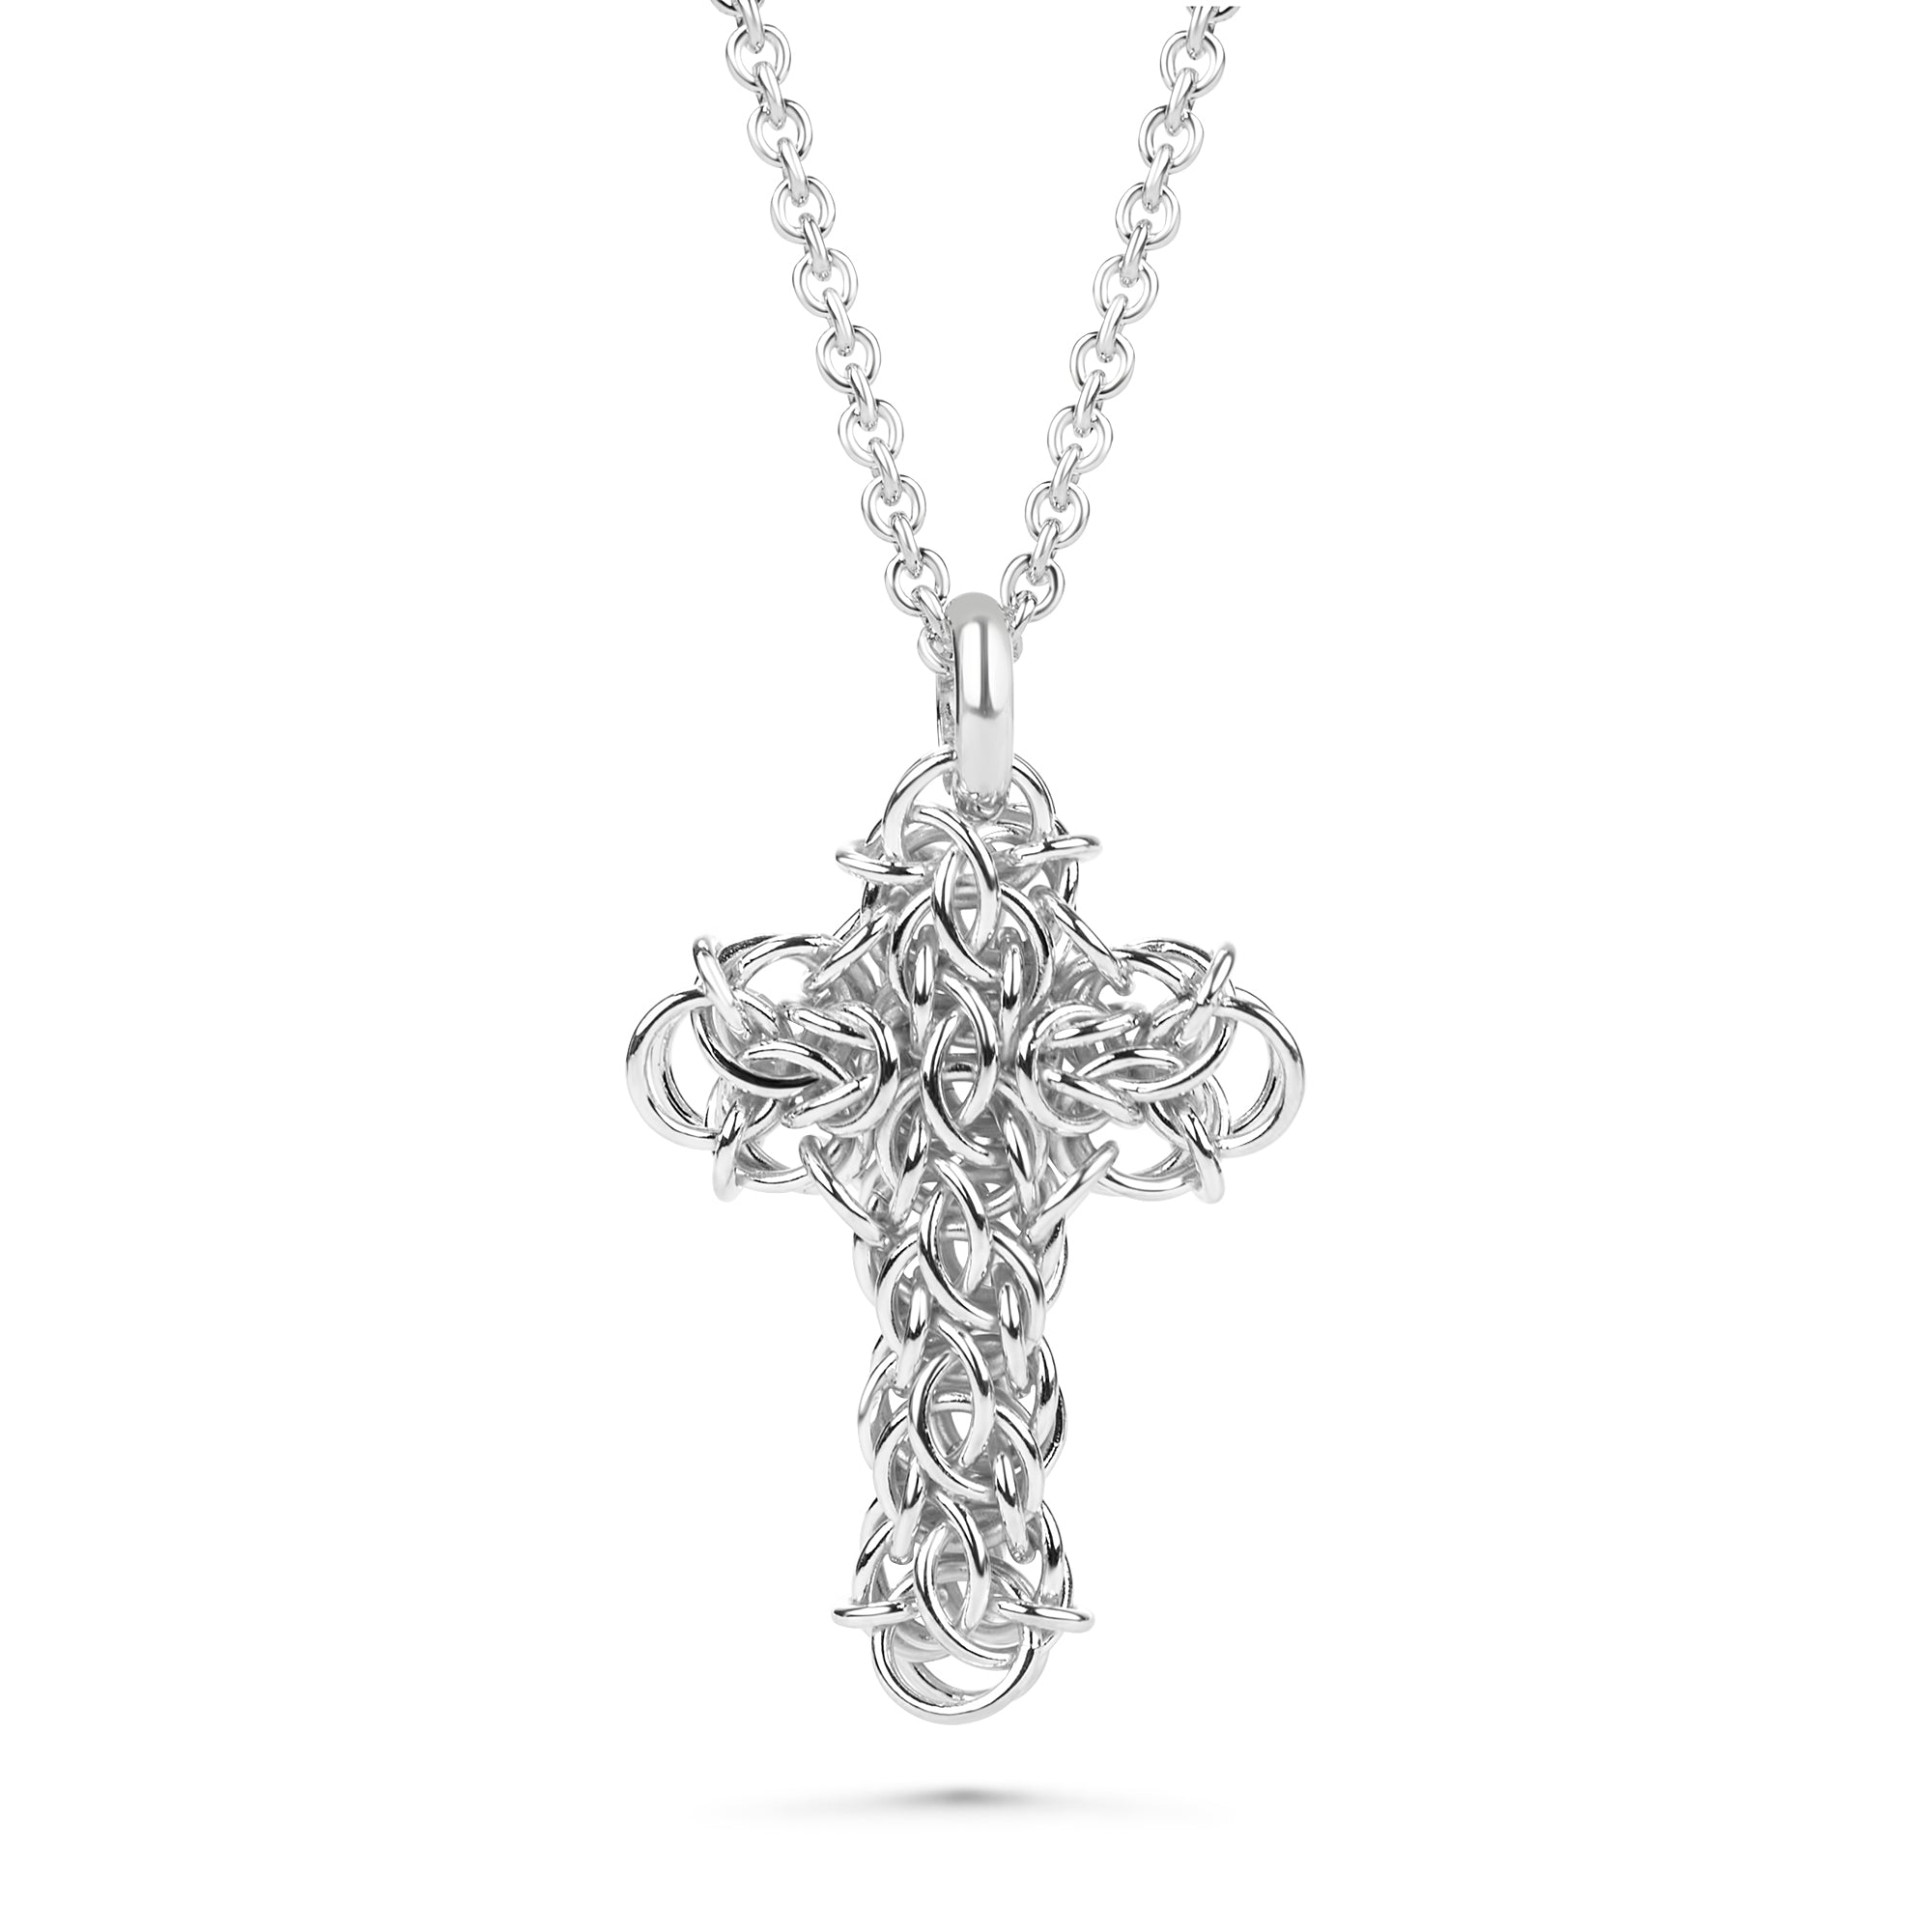 Fused Chainmaille Cross Pendant Necklace, Small